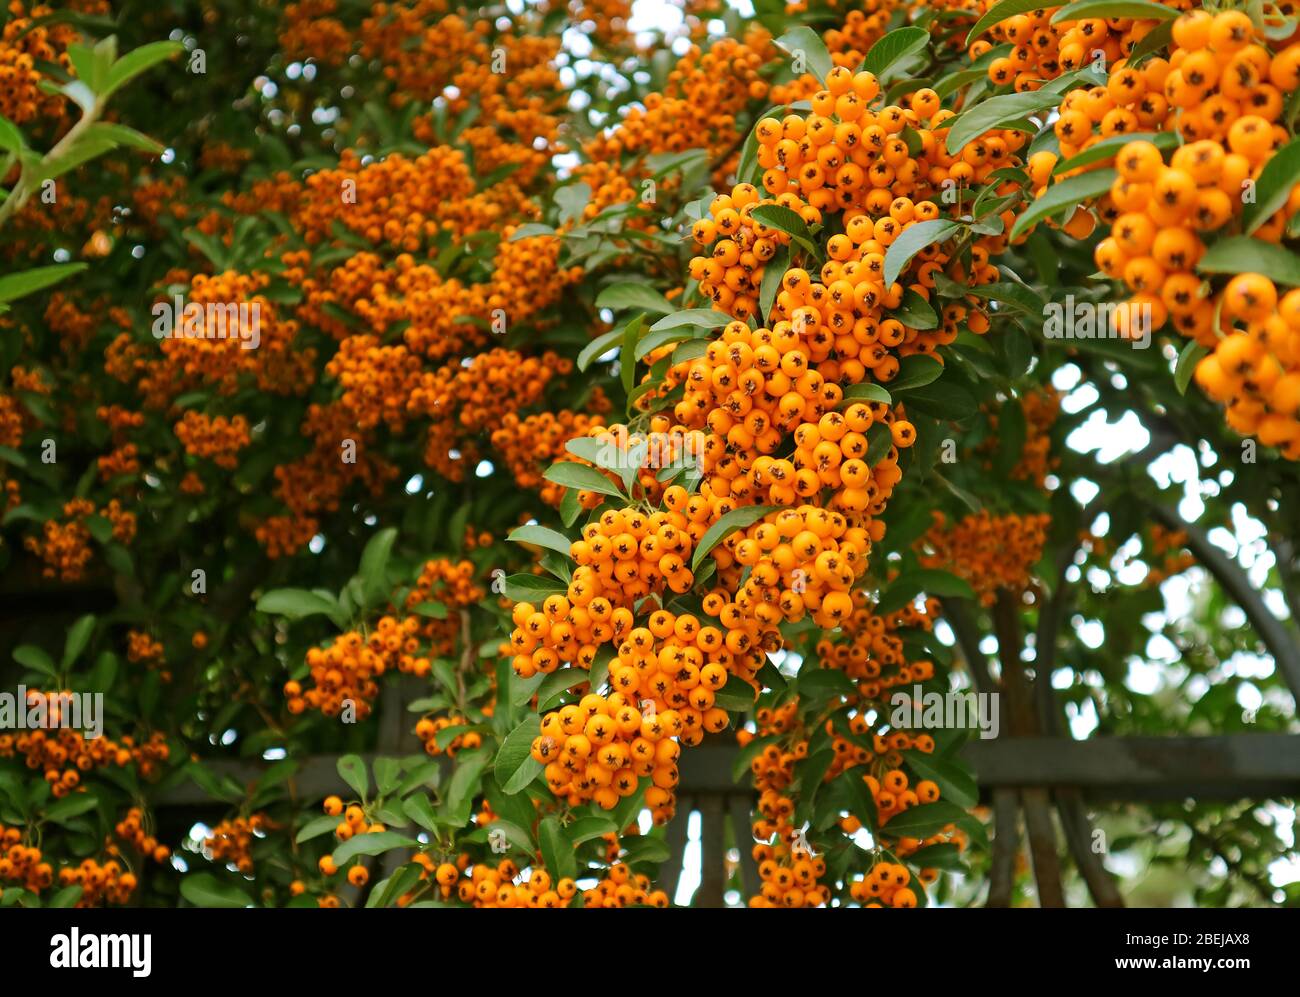 Closeup Bunch of Vivid Orange Fruits of Firethorn (Pyracantha) Growing on the Fence Stock Photo